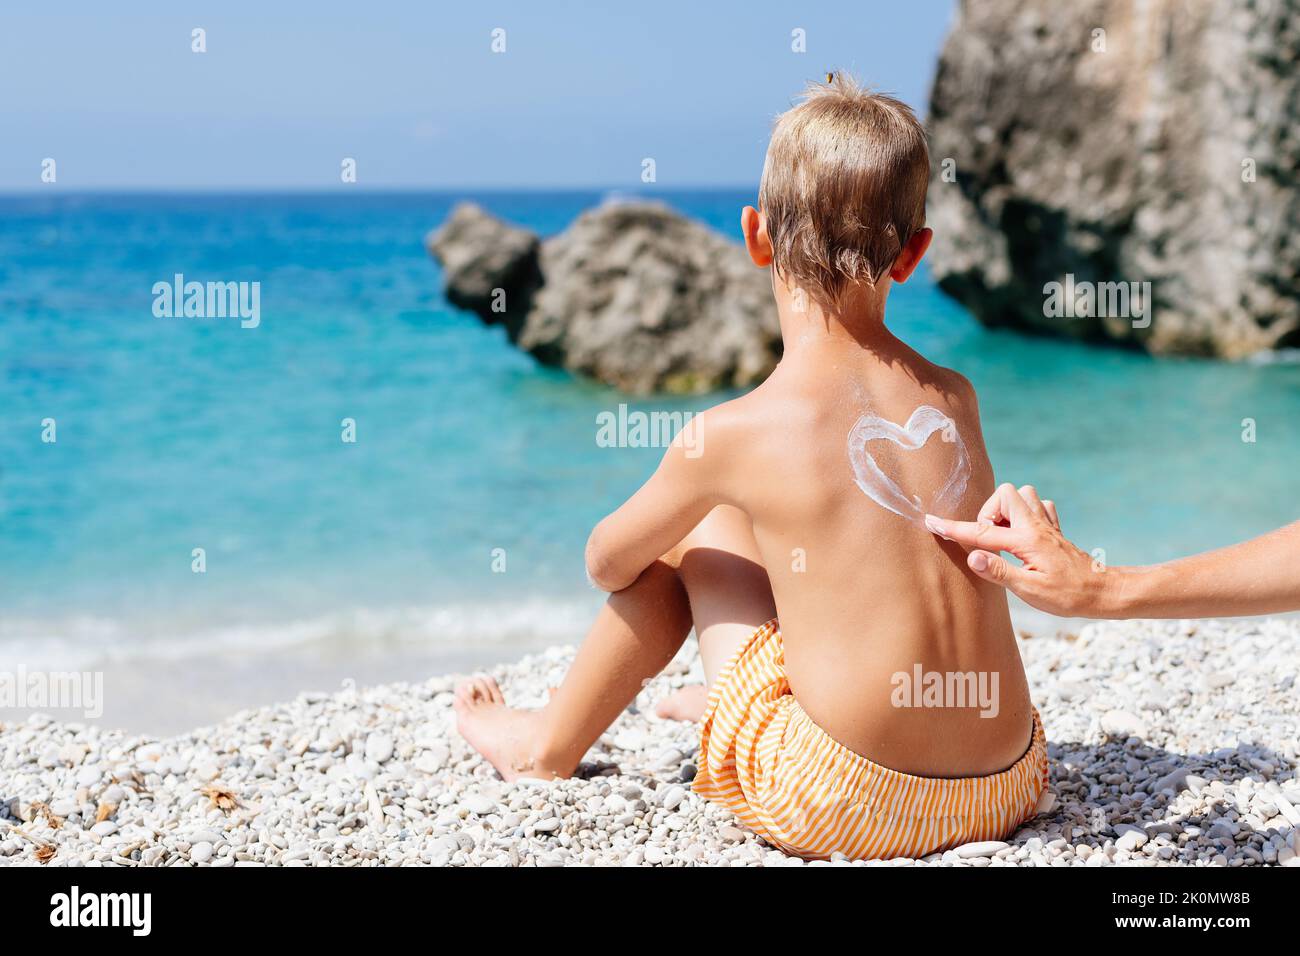 Mom smears her baby's back with sunscreen on a beach in Corfu, Greece. She draws a heart of cream on her son's back.  Stock Photo